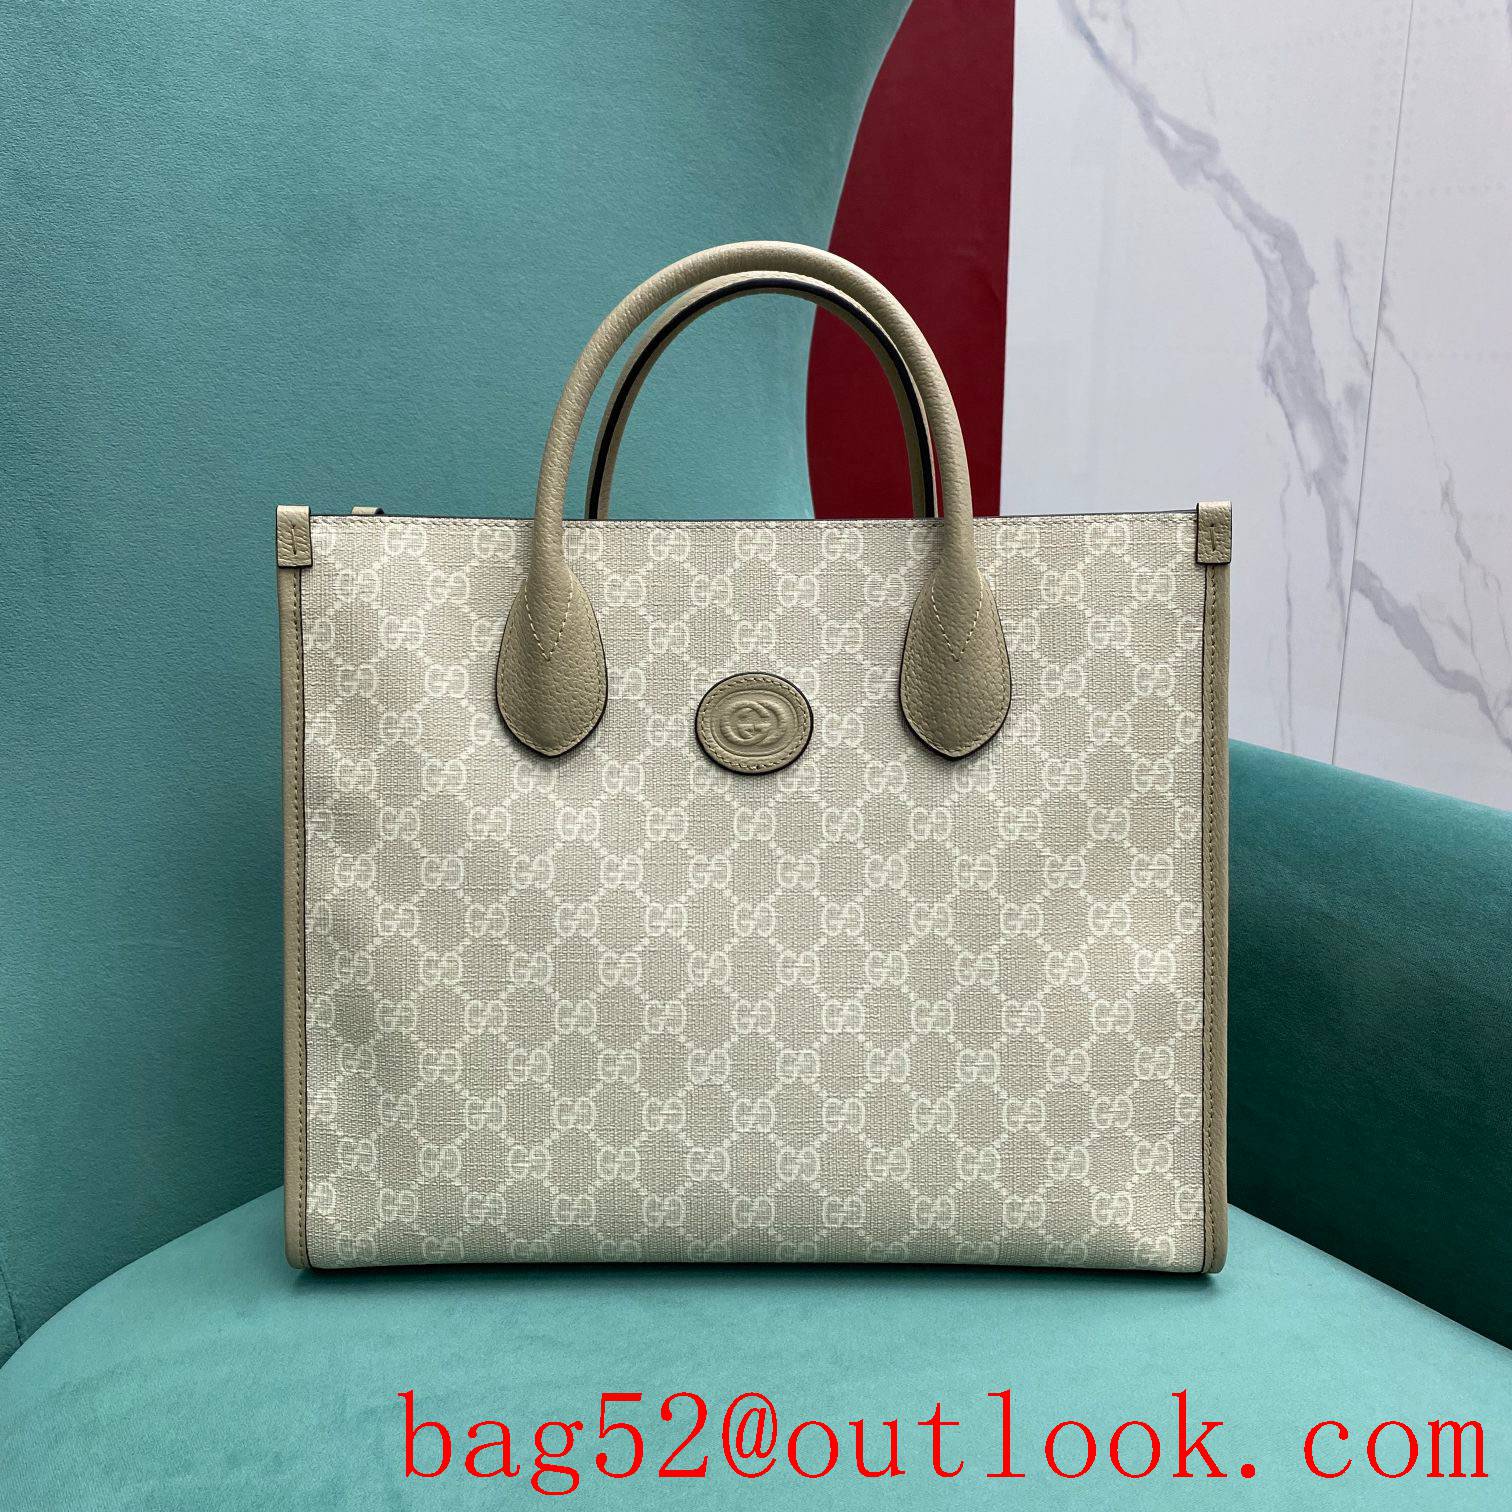 Gucci brown with PVC old flower material retro white tote handbag